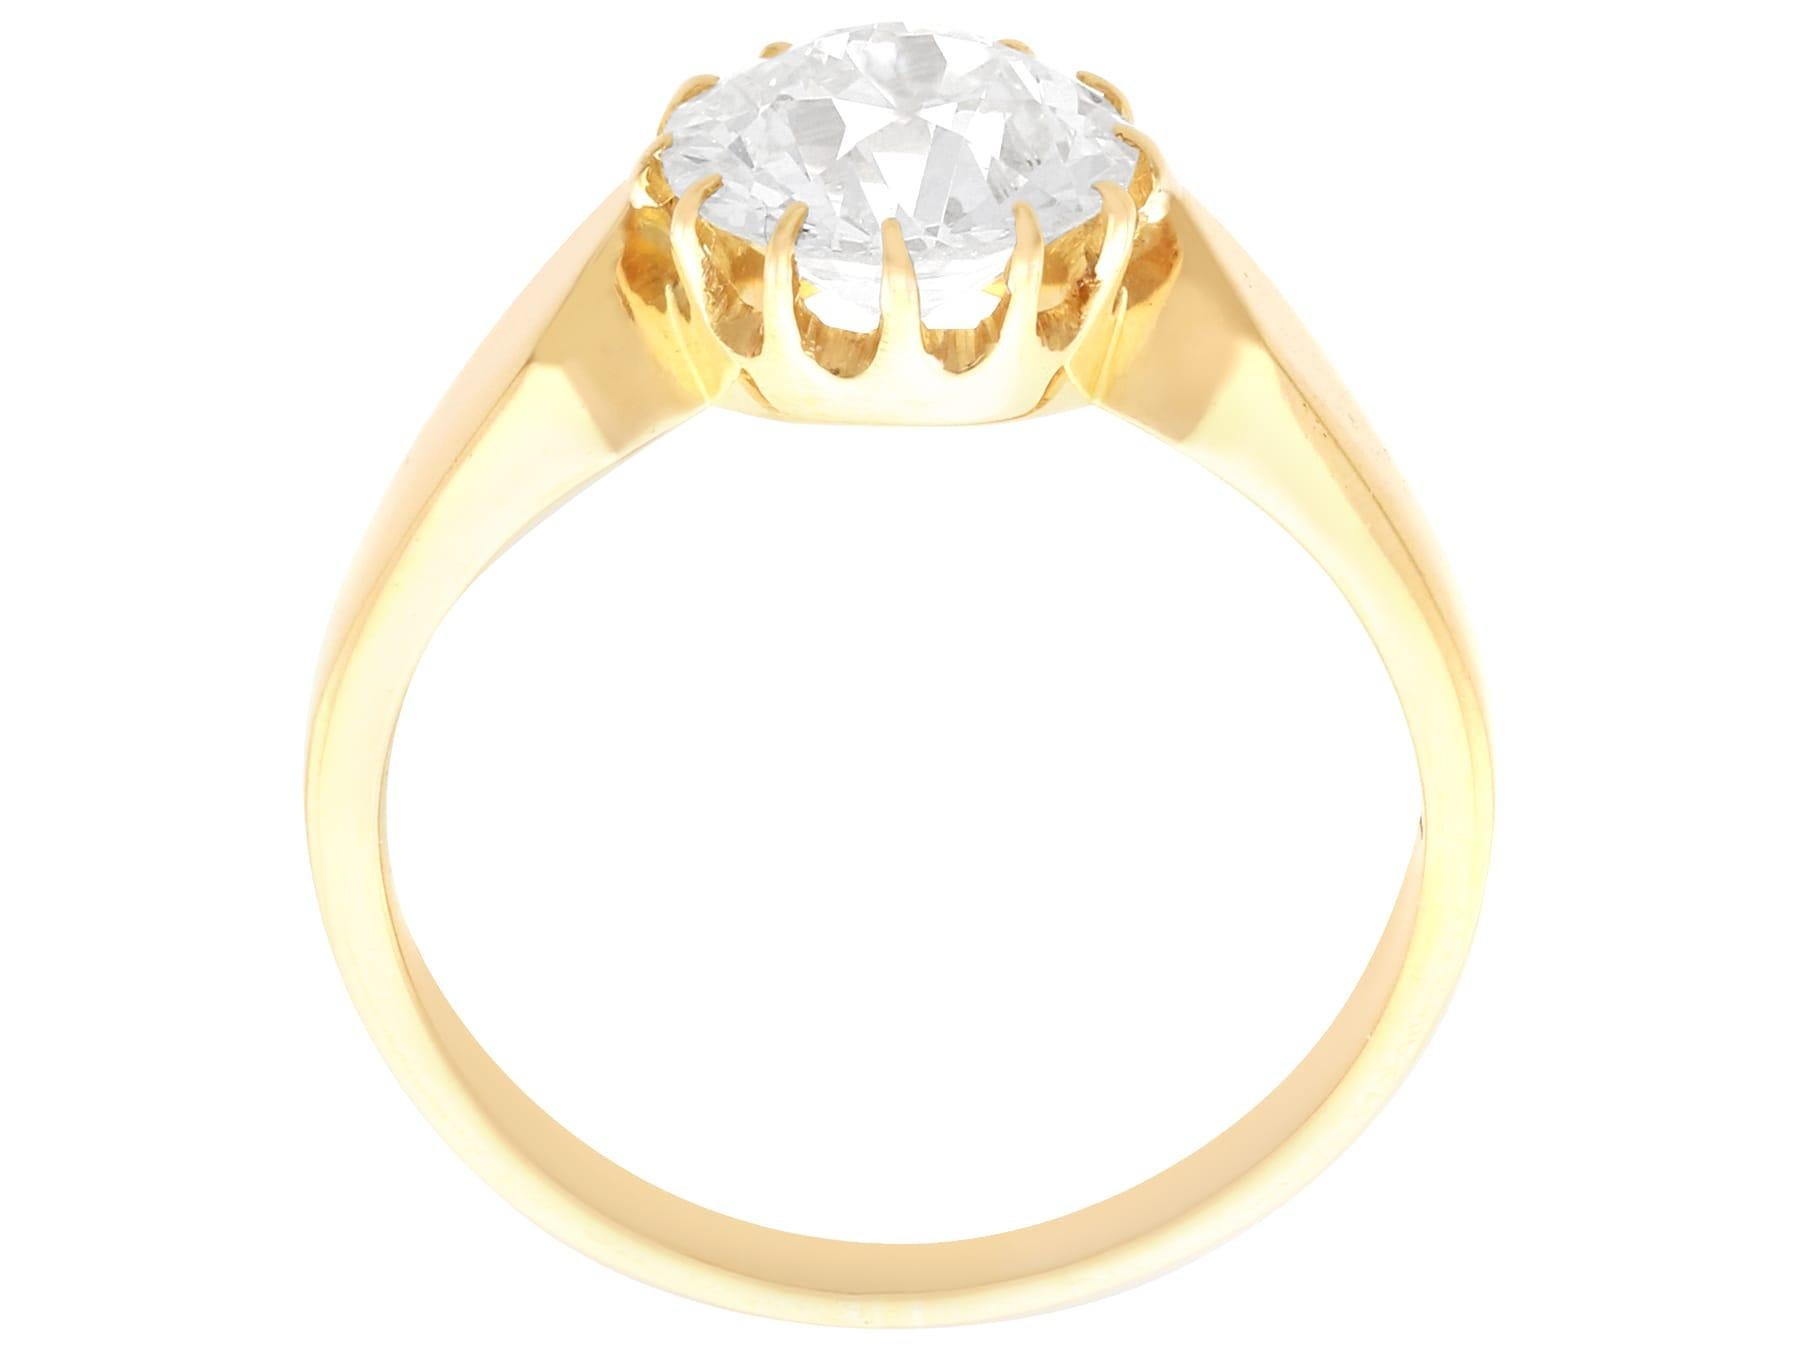 Women's or Men's Edwardian 2.16 carat Diamond and 18k Yellow Gold Solitaire Ring For Sale